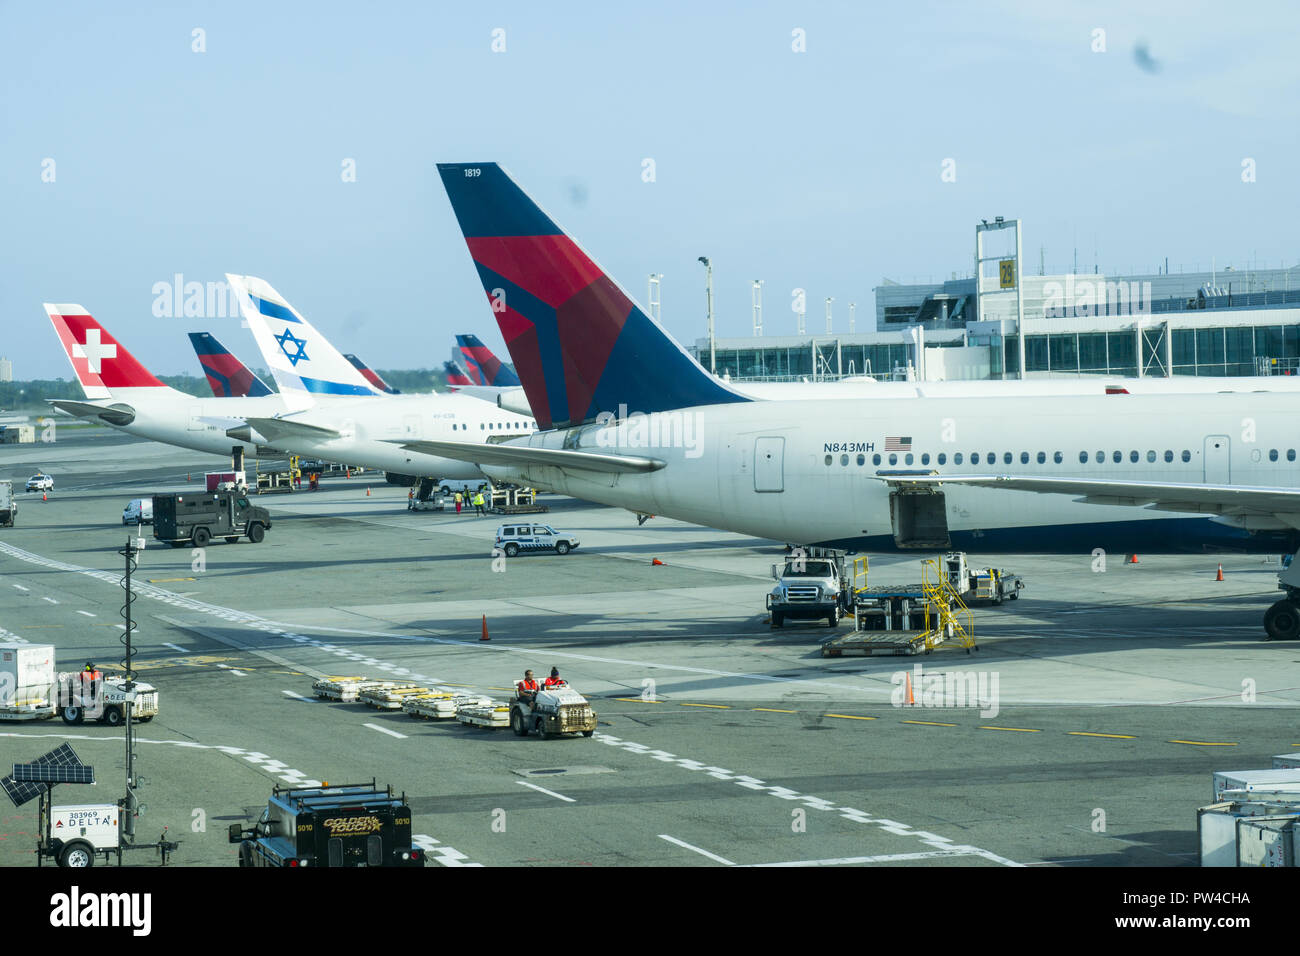 International airlines, Delta, Swiss ir and Israeli planes on the tarmac at the International Terminlal 4 at JFK in New York City. Many flights leave in the early evening to arrive in the morning in Europe. Stock Photo